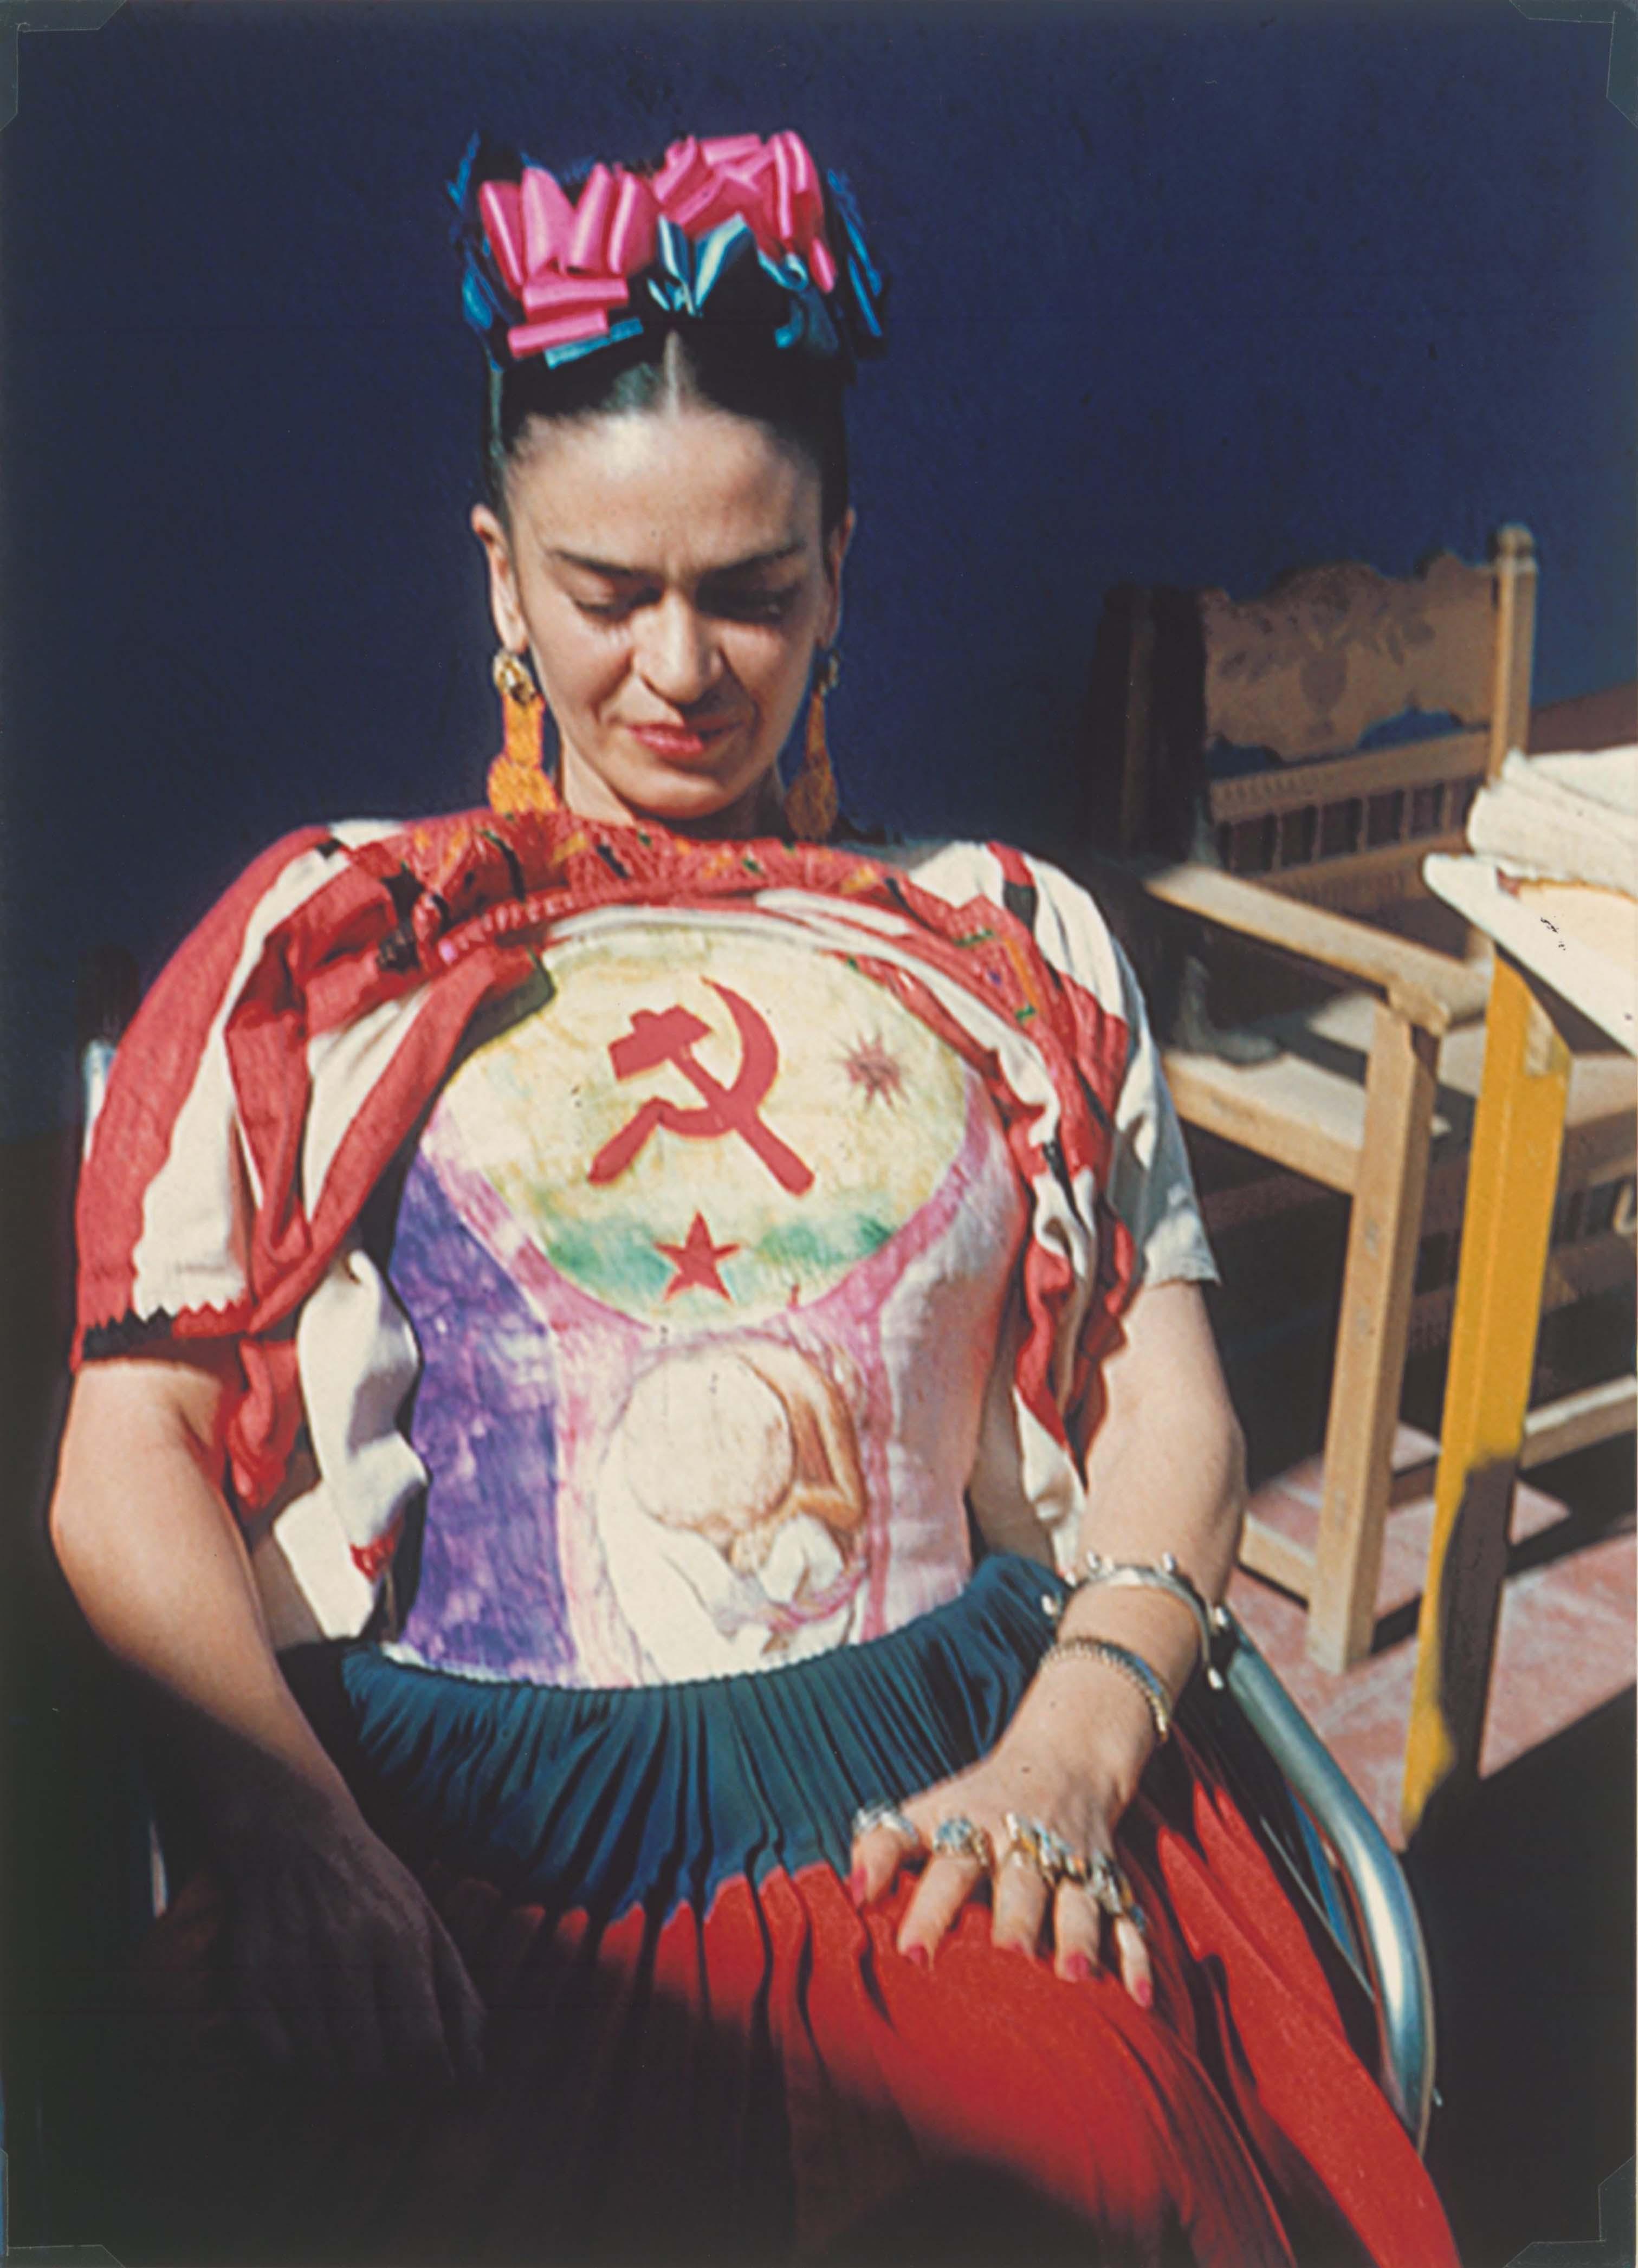 Frida Kahlo par Florence Arquin, vers 1951.
Collection privée © Diego Rivera and Frida
Kahlo archives, Bank of México, fiduciary in
the Frida Kahlo and Diego Rivera Museums
Trust
Autoportrait